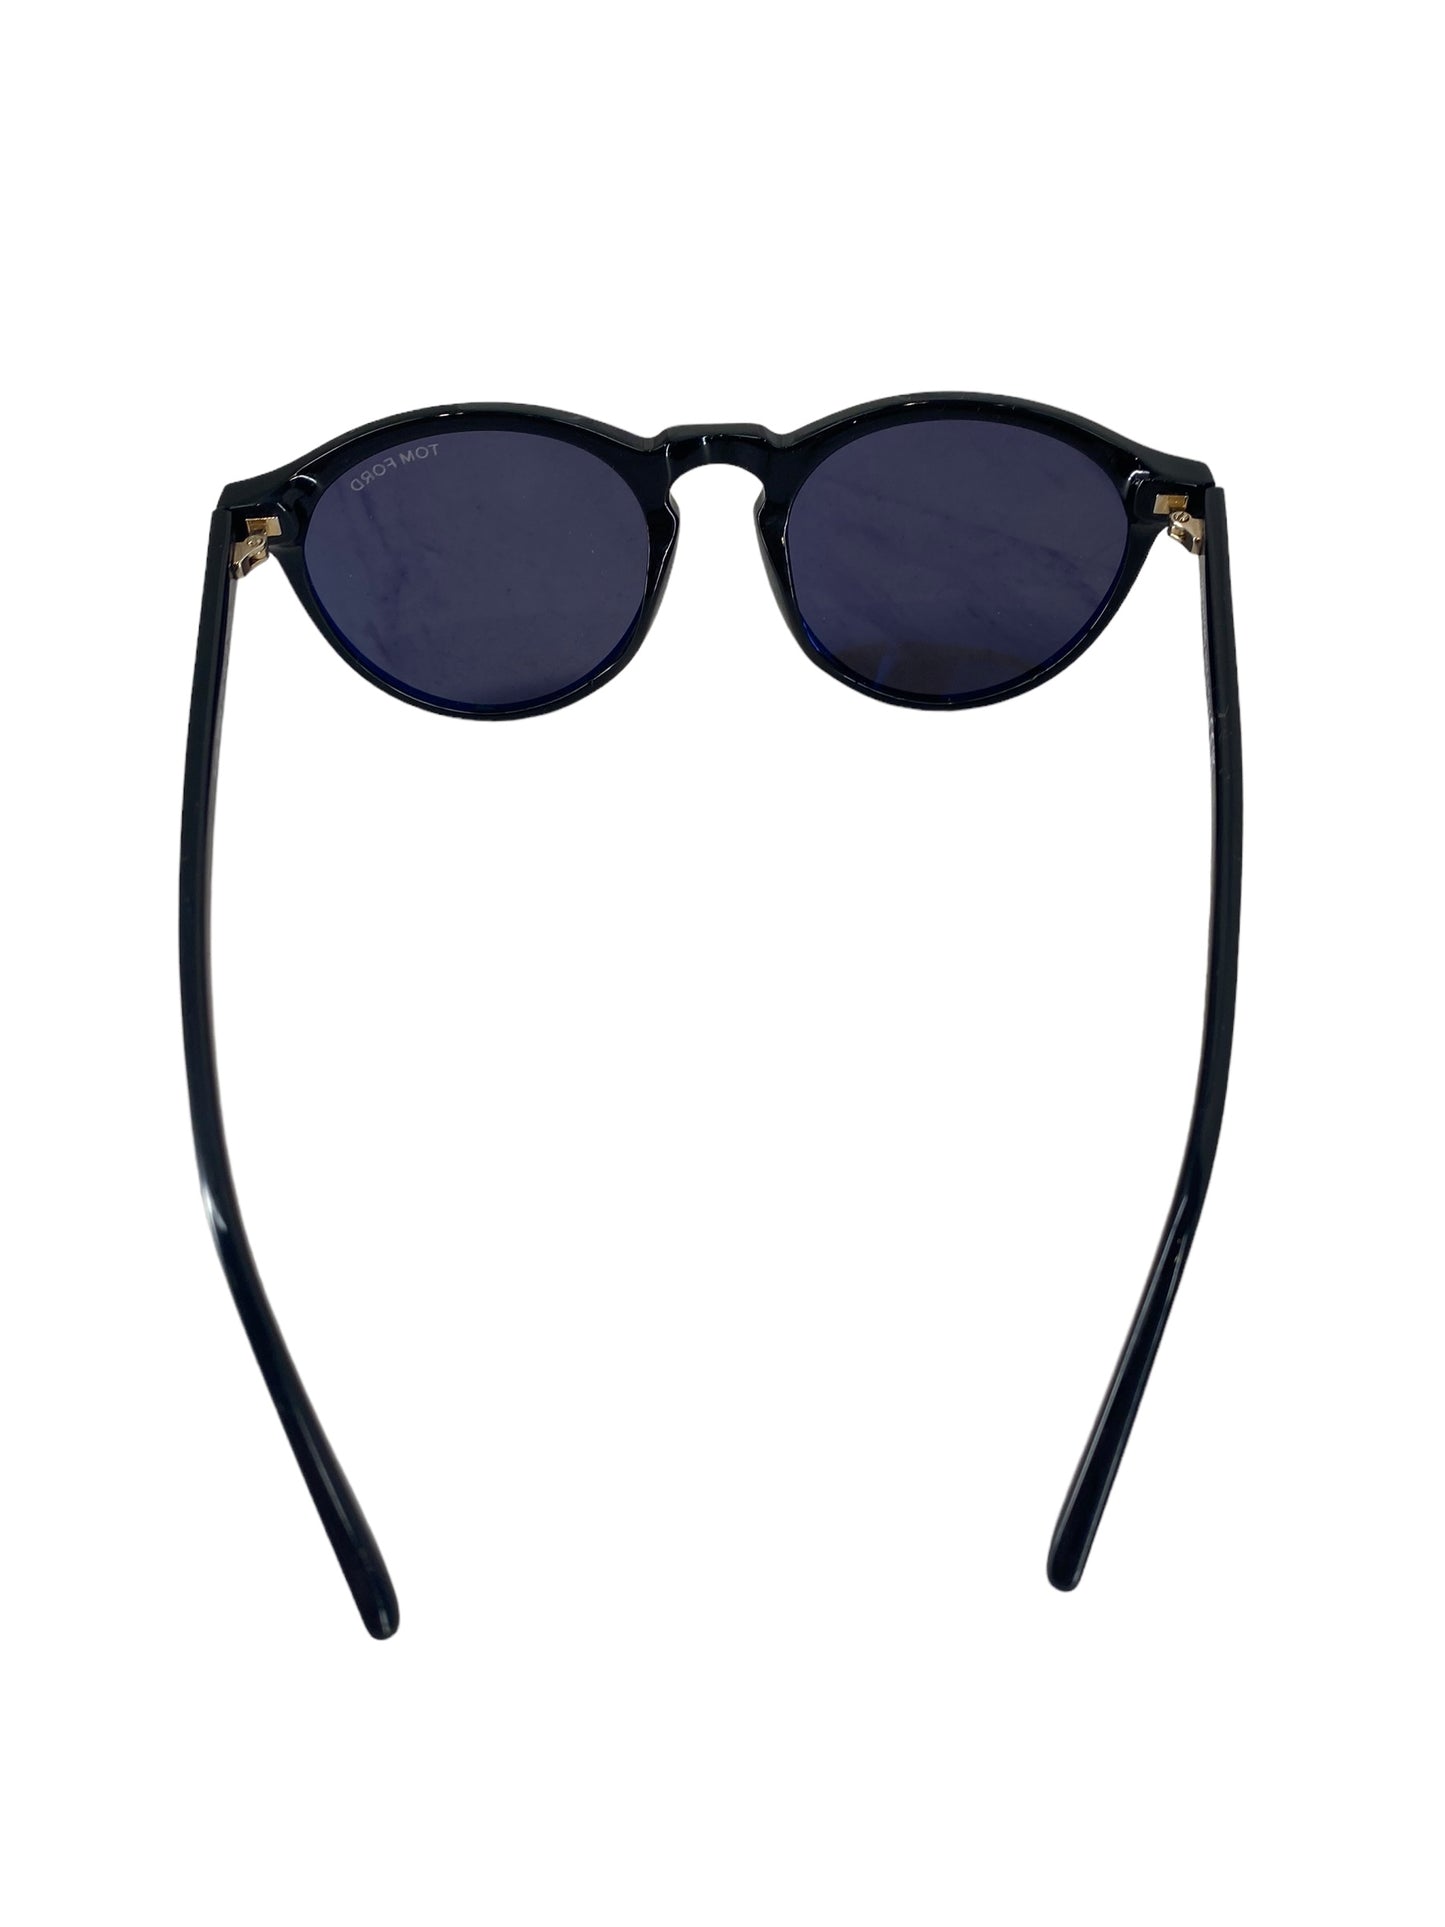 Sunglasses By Tom Ford